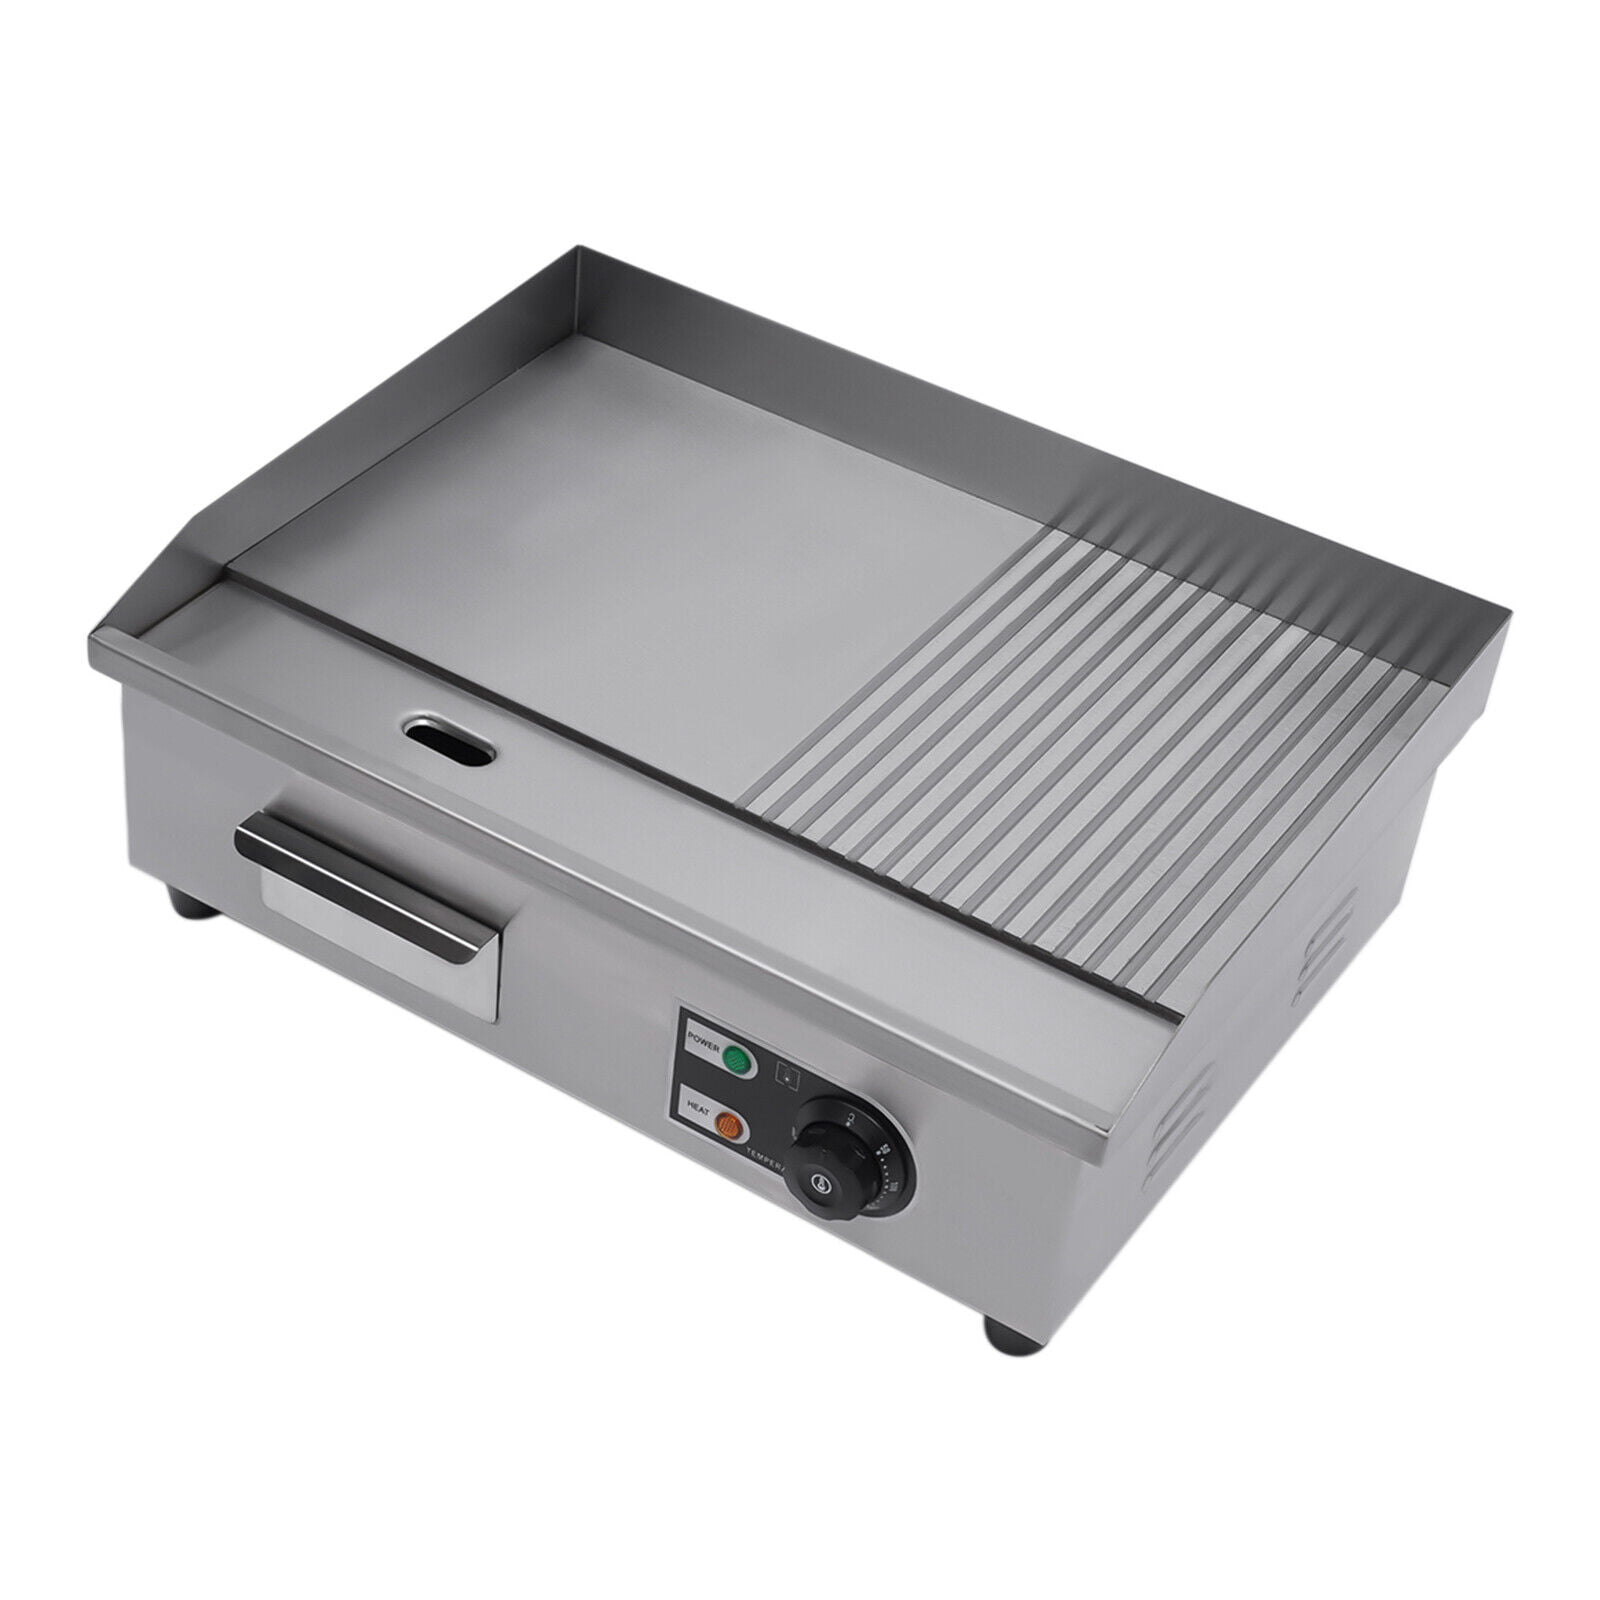 Electric Griddle Flat Top Grill 1300W Hotplate BBQ Commercial Kitchen Hot  plate Electric Countertop Griddle Machine 122°F to 572°F 1.02*18.90*8.07  inch 